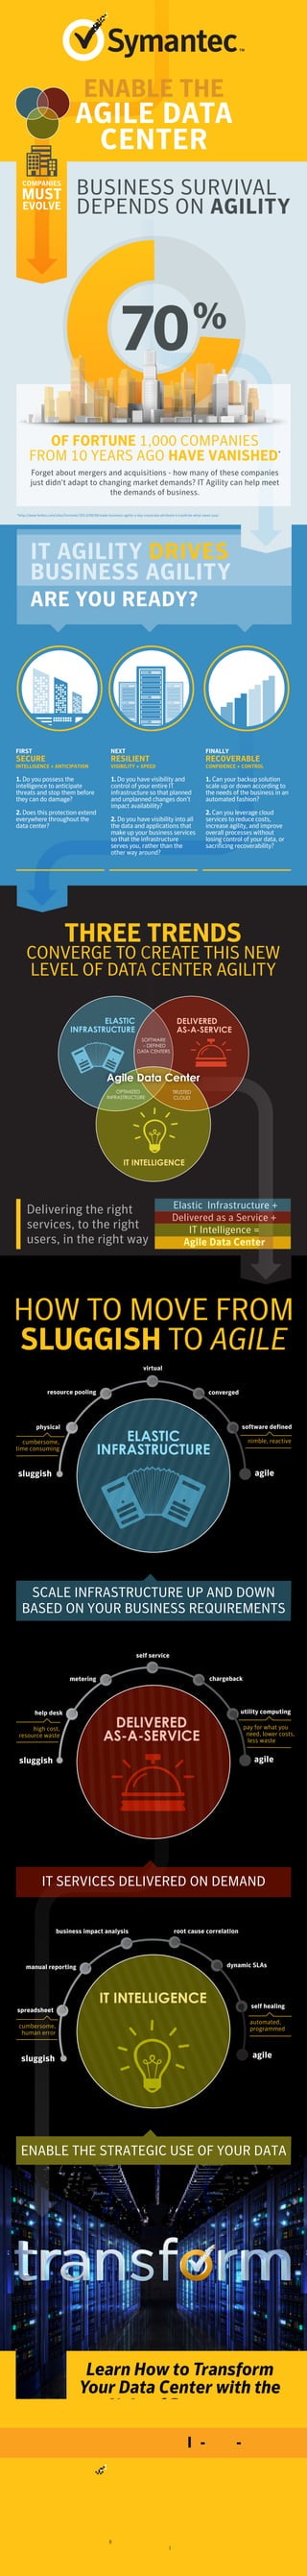 THREE TRENDS
CONVERGE TO CREATE THIS NEW
LEVEL OF DATA CENTER AGILITY
HOW TO MOVE FROM
SLUGGISH TO AGILE
Learn How to Transform
Your Data Center with the
Help of Symantec.
www.symantec.com/agile-data-center
FIRST
SECURE
INTELLIGENCE + ANTICIPATION
1. Do you possess the
intelligence to anticipate
threats and stop them before
they can do damage?
2. Does this protection extend
everywhere throughout the
data center?
NEXT
RESILIENT
VISIBILITY + SPEED
1.Do you have visibility and
control of your entire IT
infrastructure so that planned
and unplanned changes don’t
2. Do you have visibility into all
the data and applications that
make up your business services
so that the infrastructure
serves you, rather than the
other way around?
FINALLY
RECOVERABLE
CONFIDENCE + CONTROL
1. Can your backup solution
scale up or down according to
the needs of the business in an
automated fashion?
2.Can you leverage cloud
services to reduce costs,
increase agility, and improve
overall processes without
losing control of your data, or
sacrificing recoverability?
IT AGILITY DRIVES
BUSINESS AGILITY
ARE YOU READY?
OPTIMIZED
INFRASTRUCTURE
TRUSTED
CLOUD
IT INTELLIGENCE
Agile Data Center
SOFTWARE
– DEFINED
DATA CENTERS
DELIVERED
AS-A-SERVICE
ELASTIC
INFRASTRUCTURE
Delivering the right
services, to the right
users, in the right way
Elastic Infrastructure +
Delivered as a Service +
IT Intelligence =
Agile Data Center
Elastic Infrastructure +
Delivered as a Service +
IT Intelligence =
Agile Data Center
SCALE INFRASTRUCTURE UP AND DOWN
BASED ON YOUR BUSINESS REQUIREMENTS
ELASTIC
INFRASTRUCTURE
sluggish agile
physical
cumbersome,
time consuming
nimble, reactive
resource pooling converged
virtual
software defined
DELIVERED
AS-A-SERVICE
sluggish agile
help desk
high cost,
resource waste
pay for what you
need, lower costs,
less waste
metering chargeback
self service
utility computing
IT SERVICES DELIVERED ON DEMAND
IT INTELLIGENCE
sluggish agile
spreadsheet
cumbersome,
human error
automated,
programmed
manual reporting
root cause correlationbusiness impact analysis
dynamic SLAs
self healing
Copyright © 2014 Symantec Corporation. All rights reserved. Symantec, the Symantec Logo, and the Checkmark Logo are
trademarks or registered trademarks of Symantec Corporation or its affiliates in the U.S. and other countries. Other names
may be trademarks of their respective owners.
11/14 #21342054
ENABLE THE STRATEGIC USE OF YOUR DATA
COMPANIES
MUST
EVOLVE
ENABLE THE
AGILE DATA
CENTER
OF FORTUNE 1,000 COMPANIES
FROM 10 YEARS AGO HAVE VANISHED*
Forget about mergers and acquisitions - how many of these companies
just didn't adapt to changing market demands? IT Agility can help meet
the demands of business.
70%
*http://www.forbes.com/sites/forrester/2013/09/09/make-business-agility-a-key-corporate-attribute-it-could-be-what-saves-you/
BUSINESS SURVIVAL
DEPENDS ON AGILITY
 